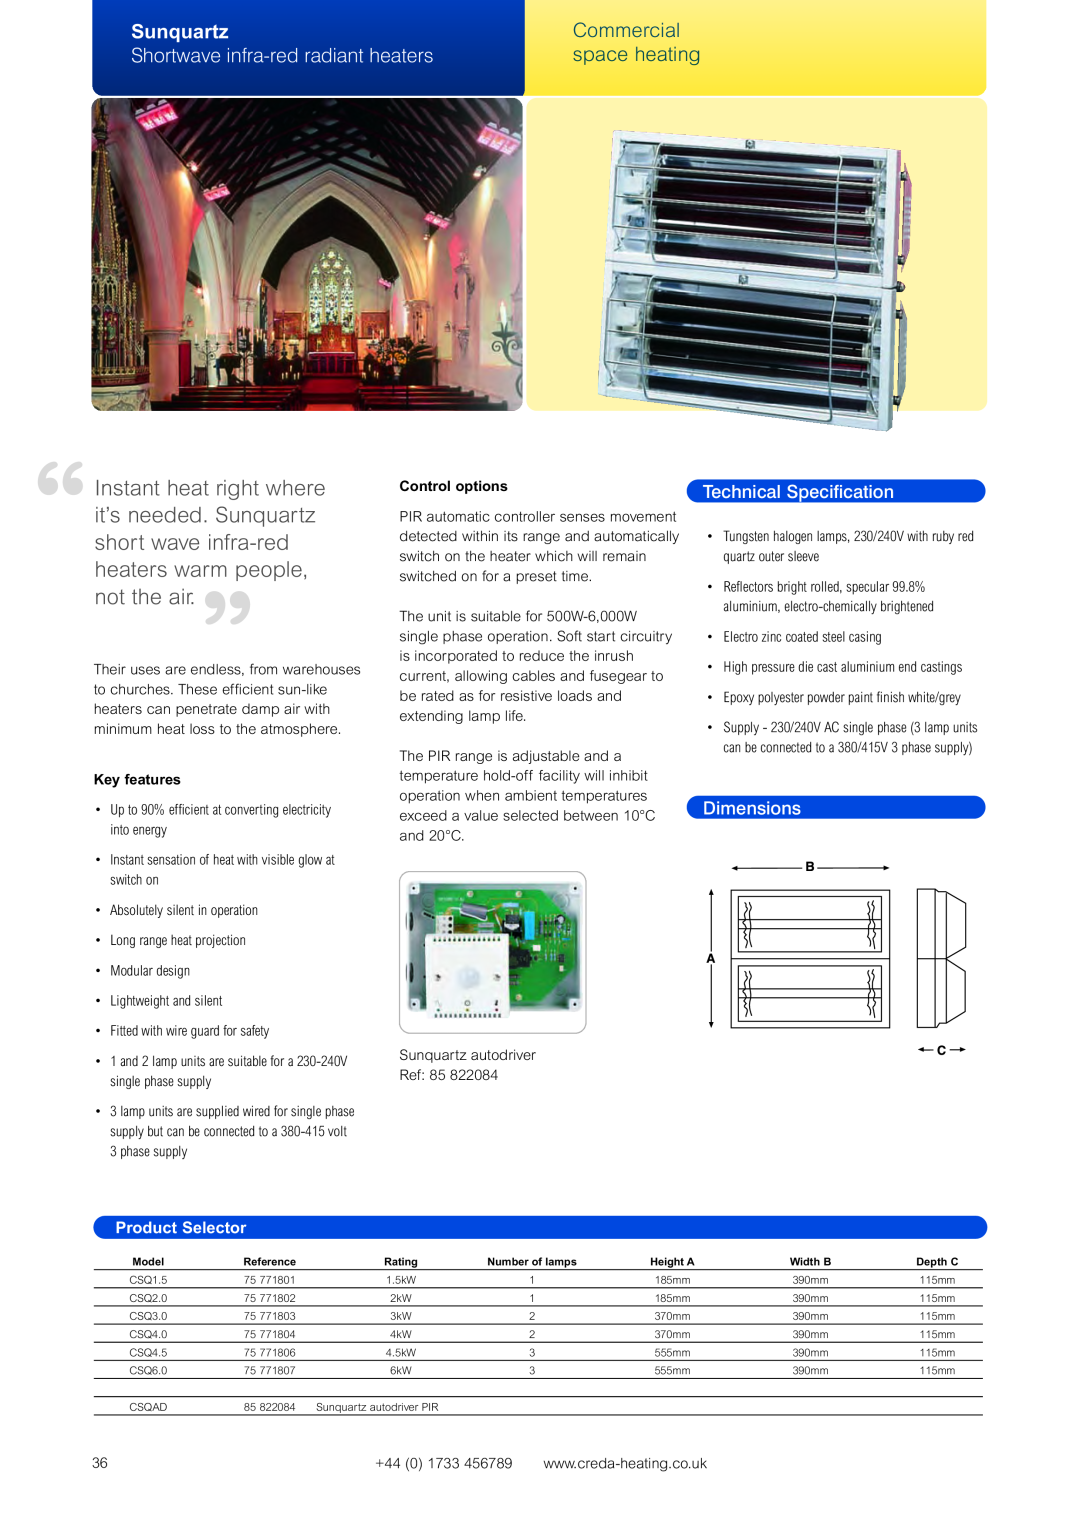 Creda Heating Solution Sunquartz, Commercial, Shortwave infra-redradiant heaters, space heating, Technical Specification 